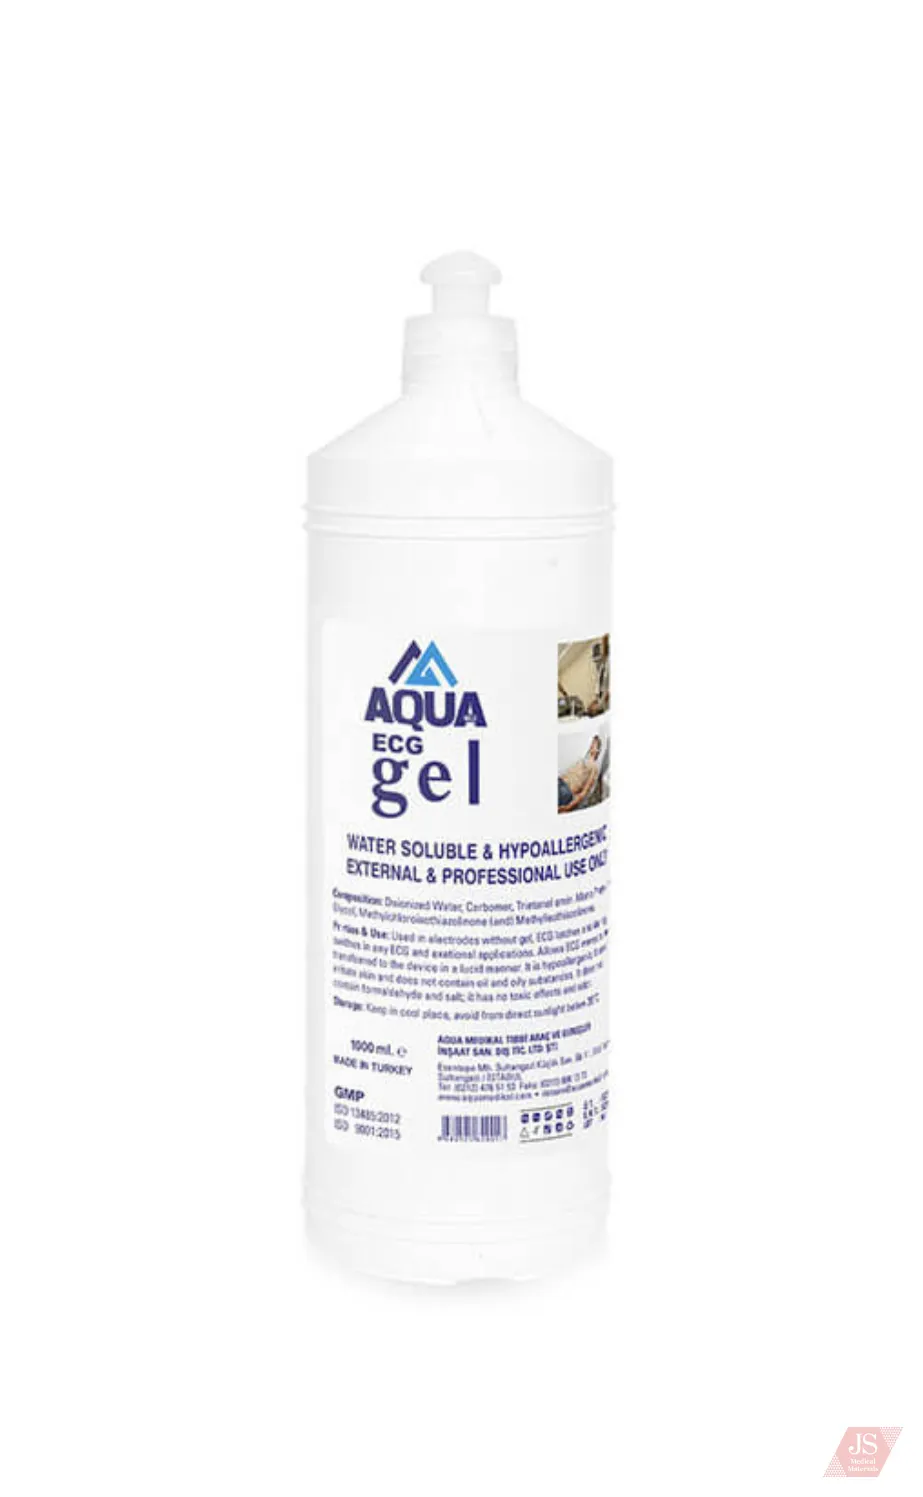  Conductive contact gel for ECG and EEG examinations, 1 liter